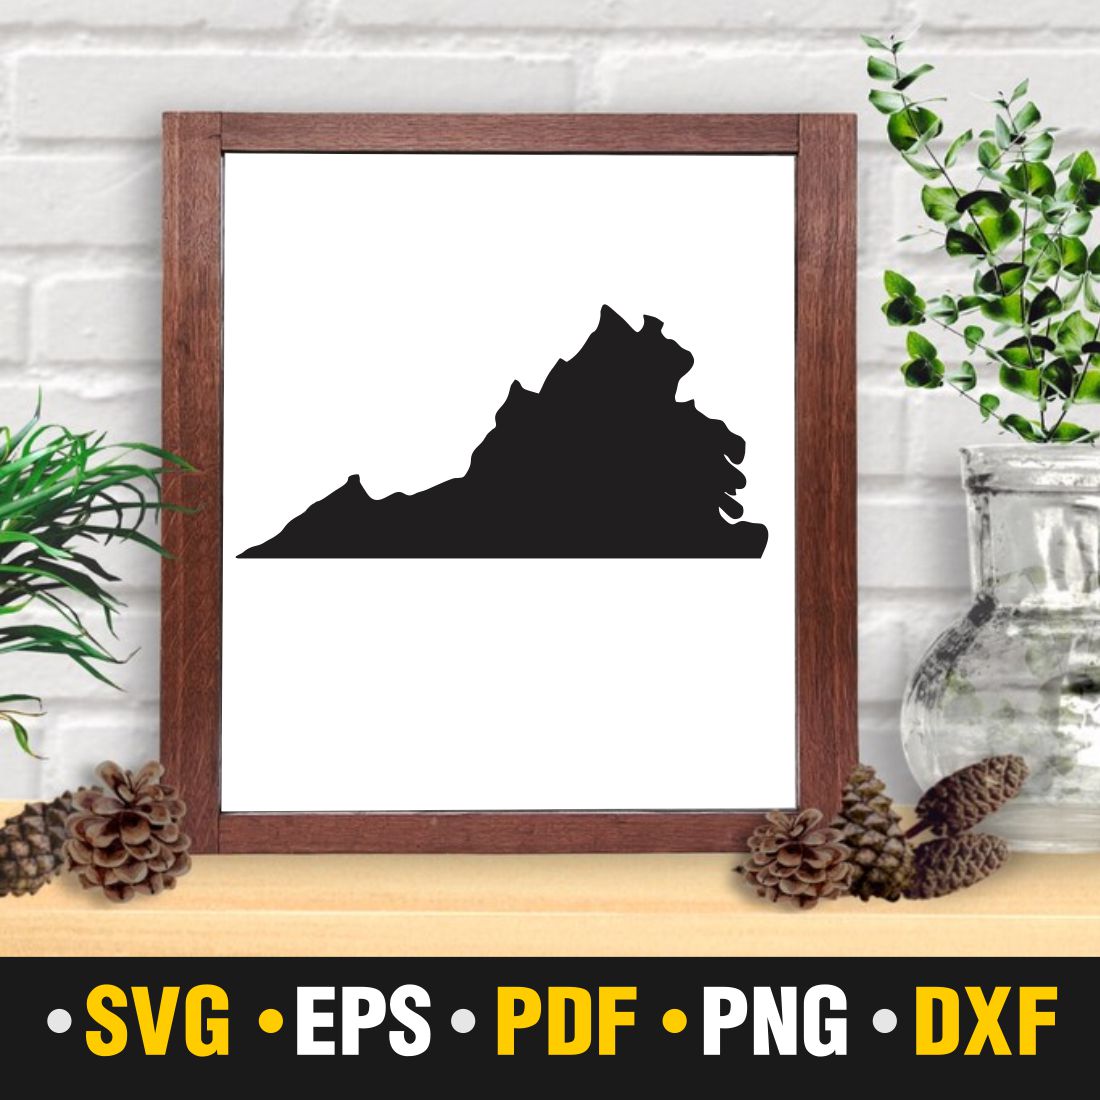 Black and white picture of a mountain in a frame.